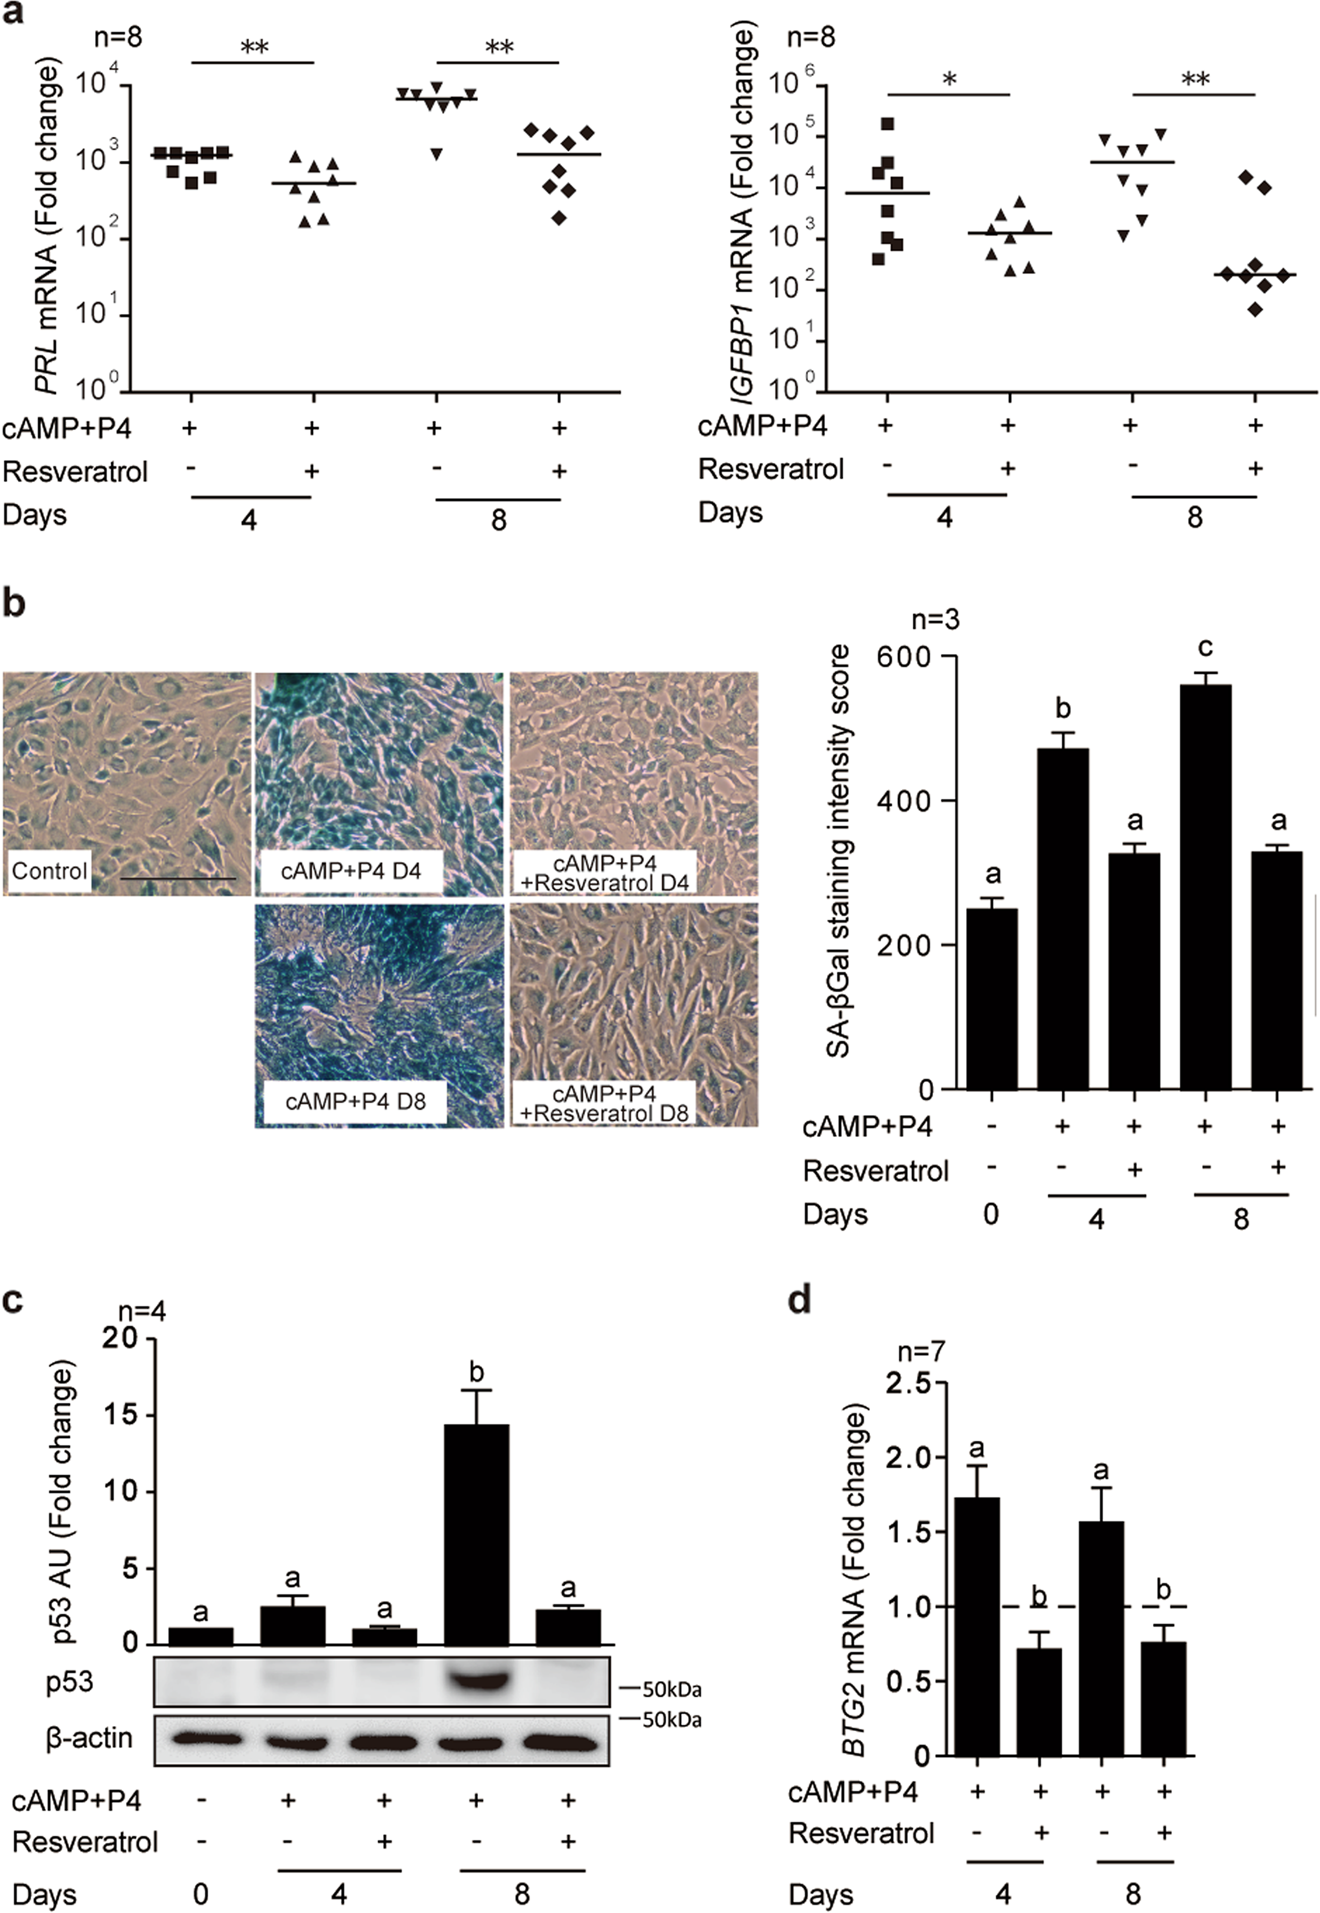 Resveratrol inhibits decidualization by accelerating downregulation of the  CRABP2-RAR pathway in differentiating human endometrial stromal cells |  Cell Death & Disease